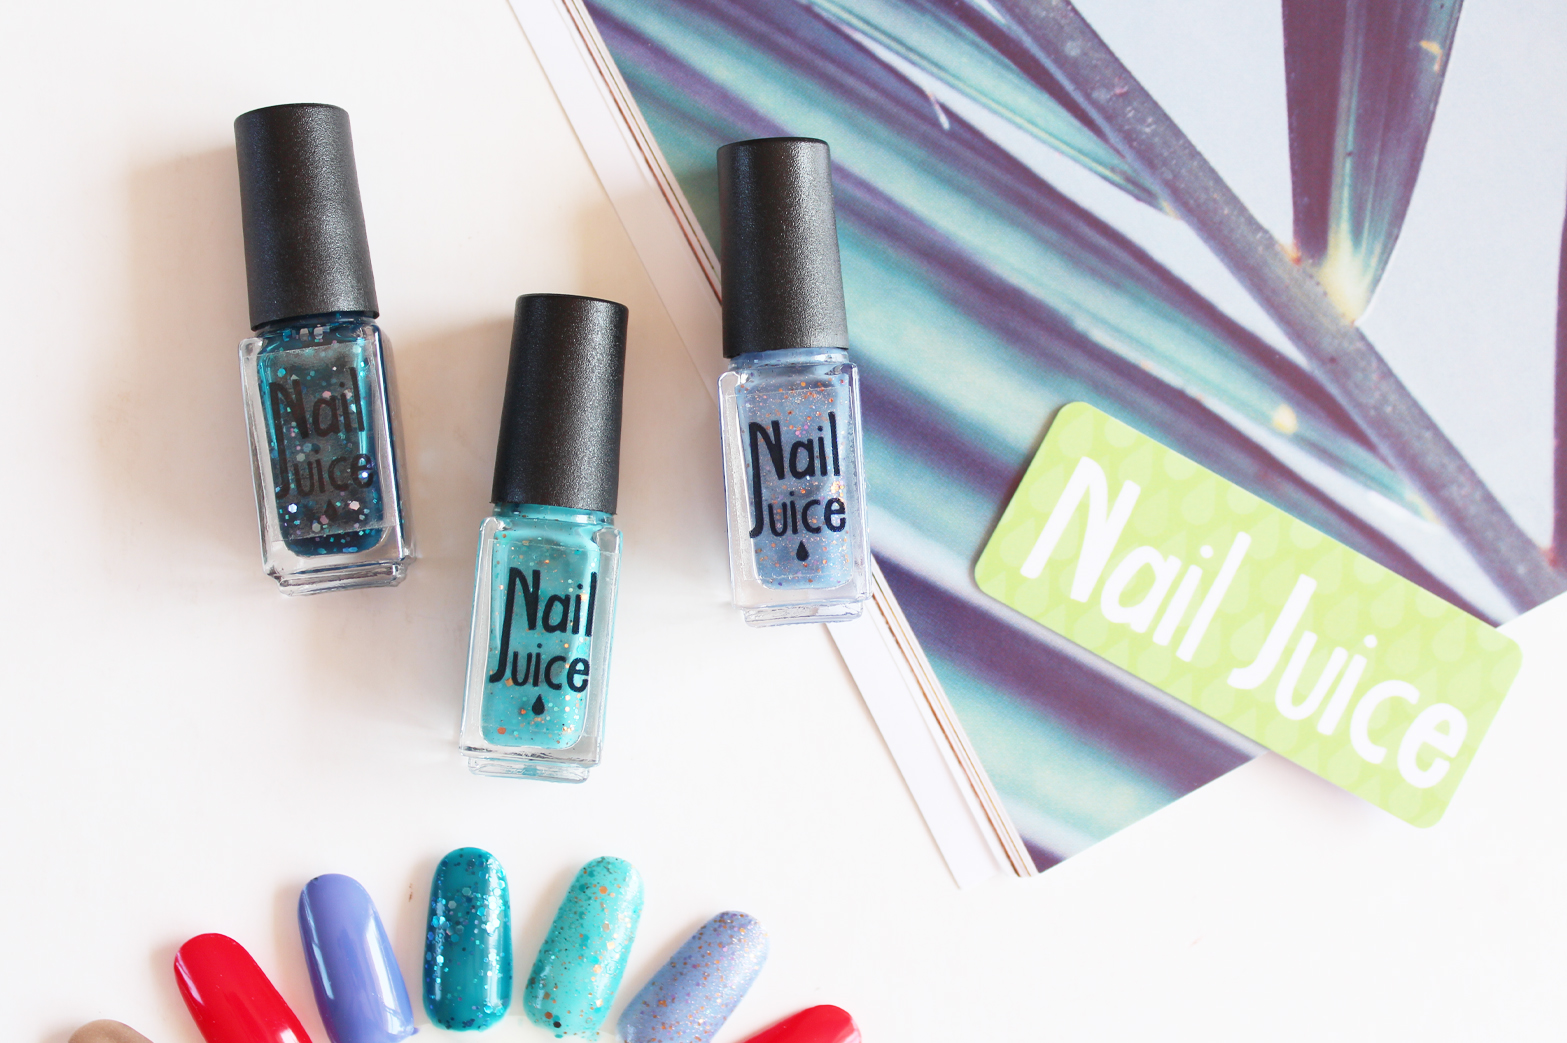 NAIL JUICE | Indie Nail Polishes - Review + Swatches - CassandraMyee